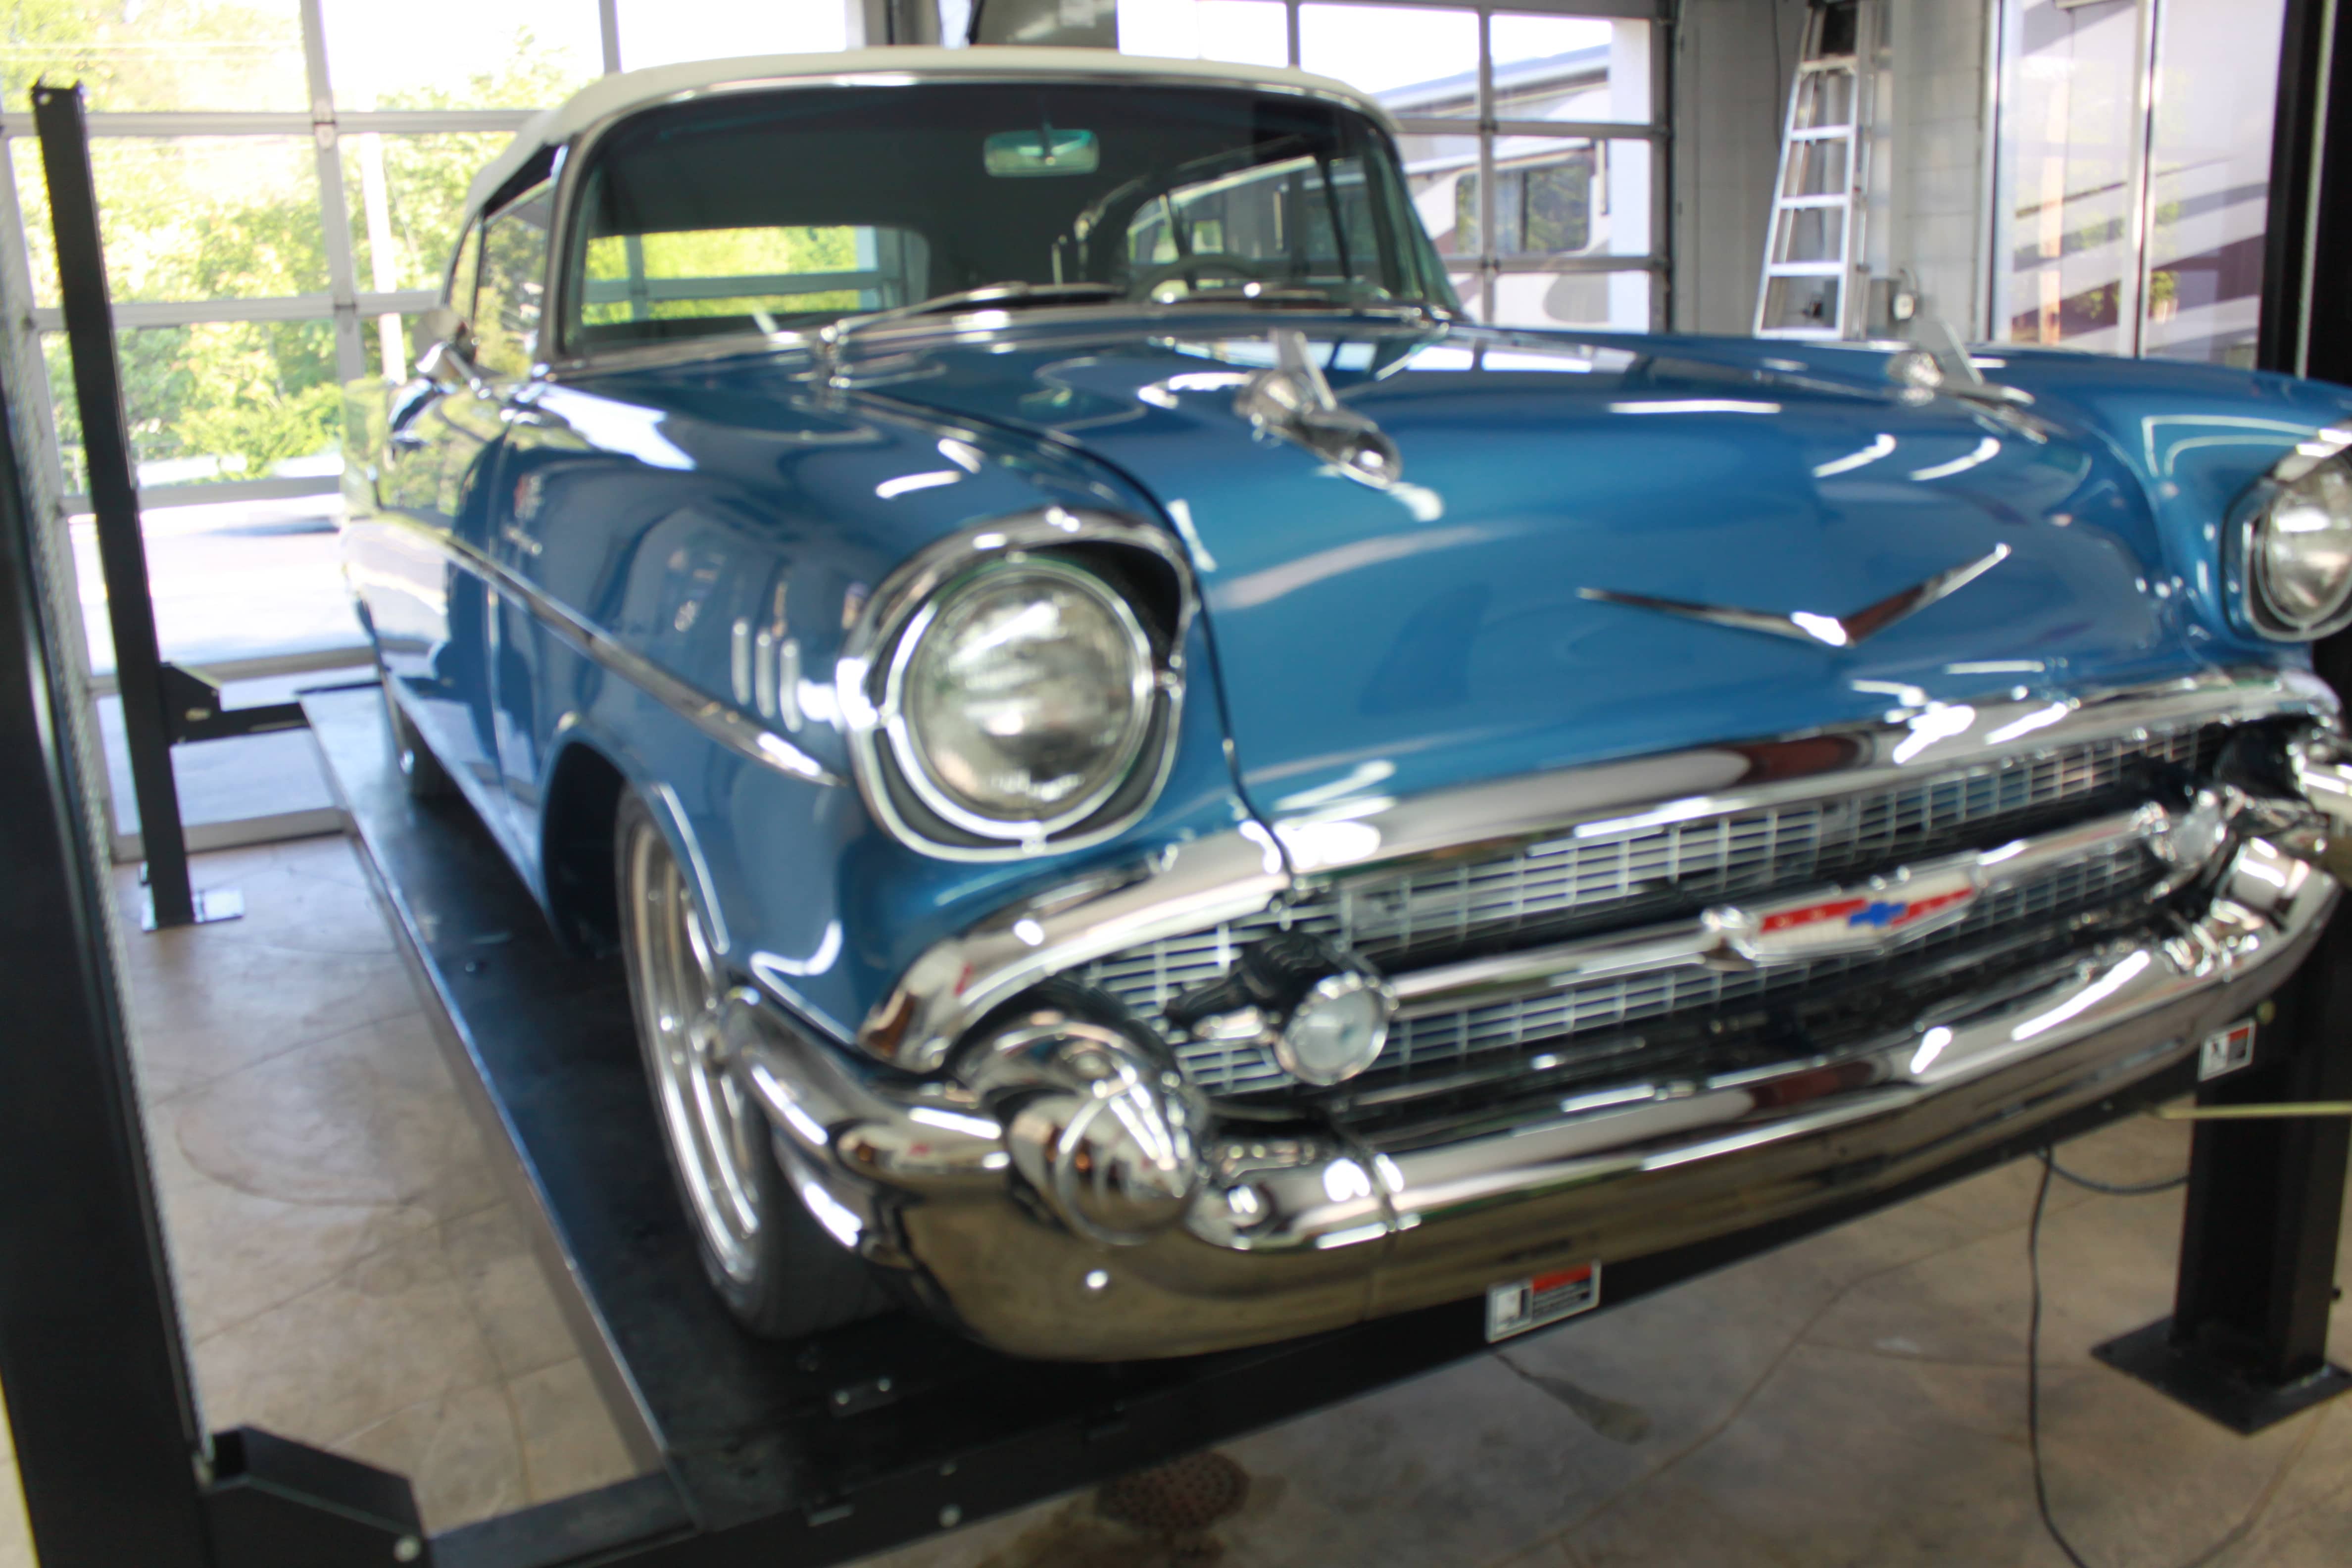 1957 Chevy Bel Air front clear rock chip paint protection XPel film St. Louis St. Charles